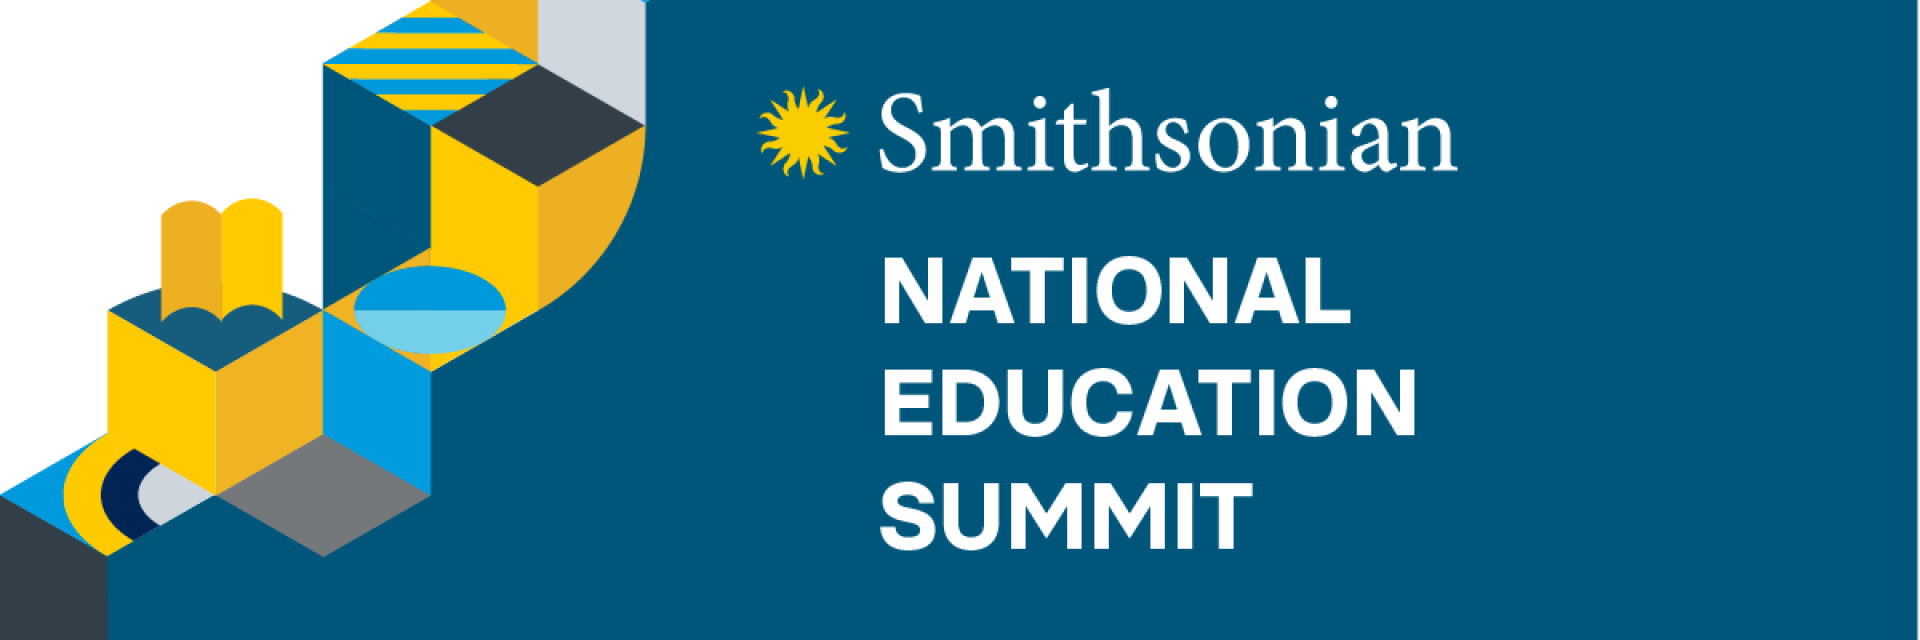 Image: Graphic steps in blue and yellow. Text: Smithsonian National Education Summit